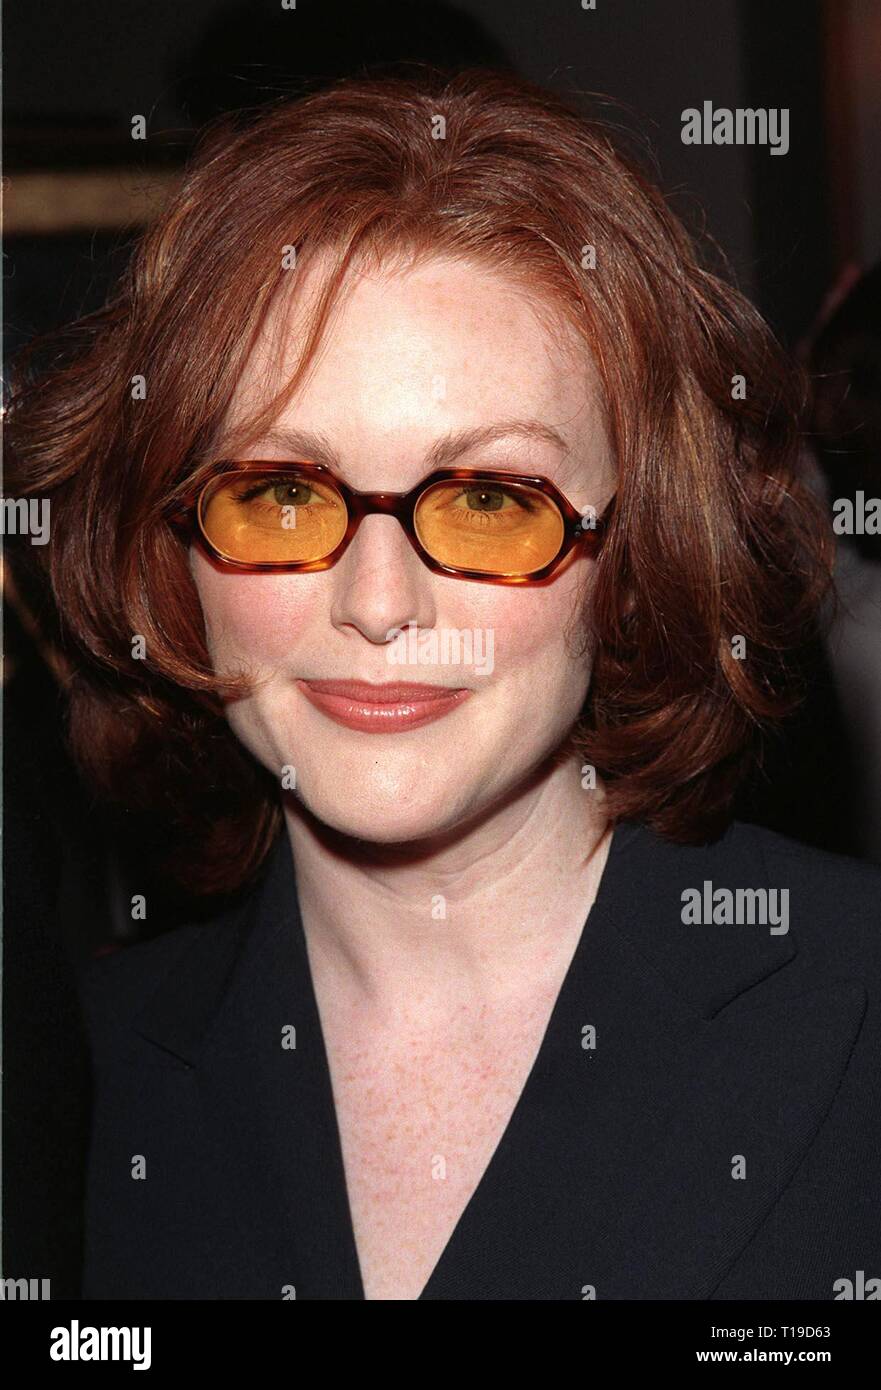 LOS ANGELES, CA - January 13, 1998: Actress JULIANNE MOORE at the L.A. Film Critics Assoc. Awards where she won the Best Supporting Actress award for 'Boogie Nights.' Stock Photo